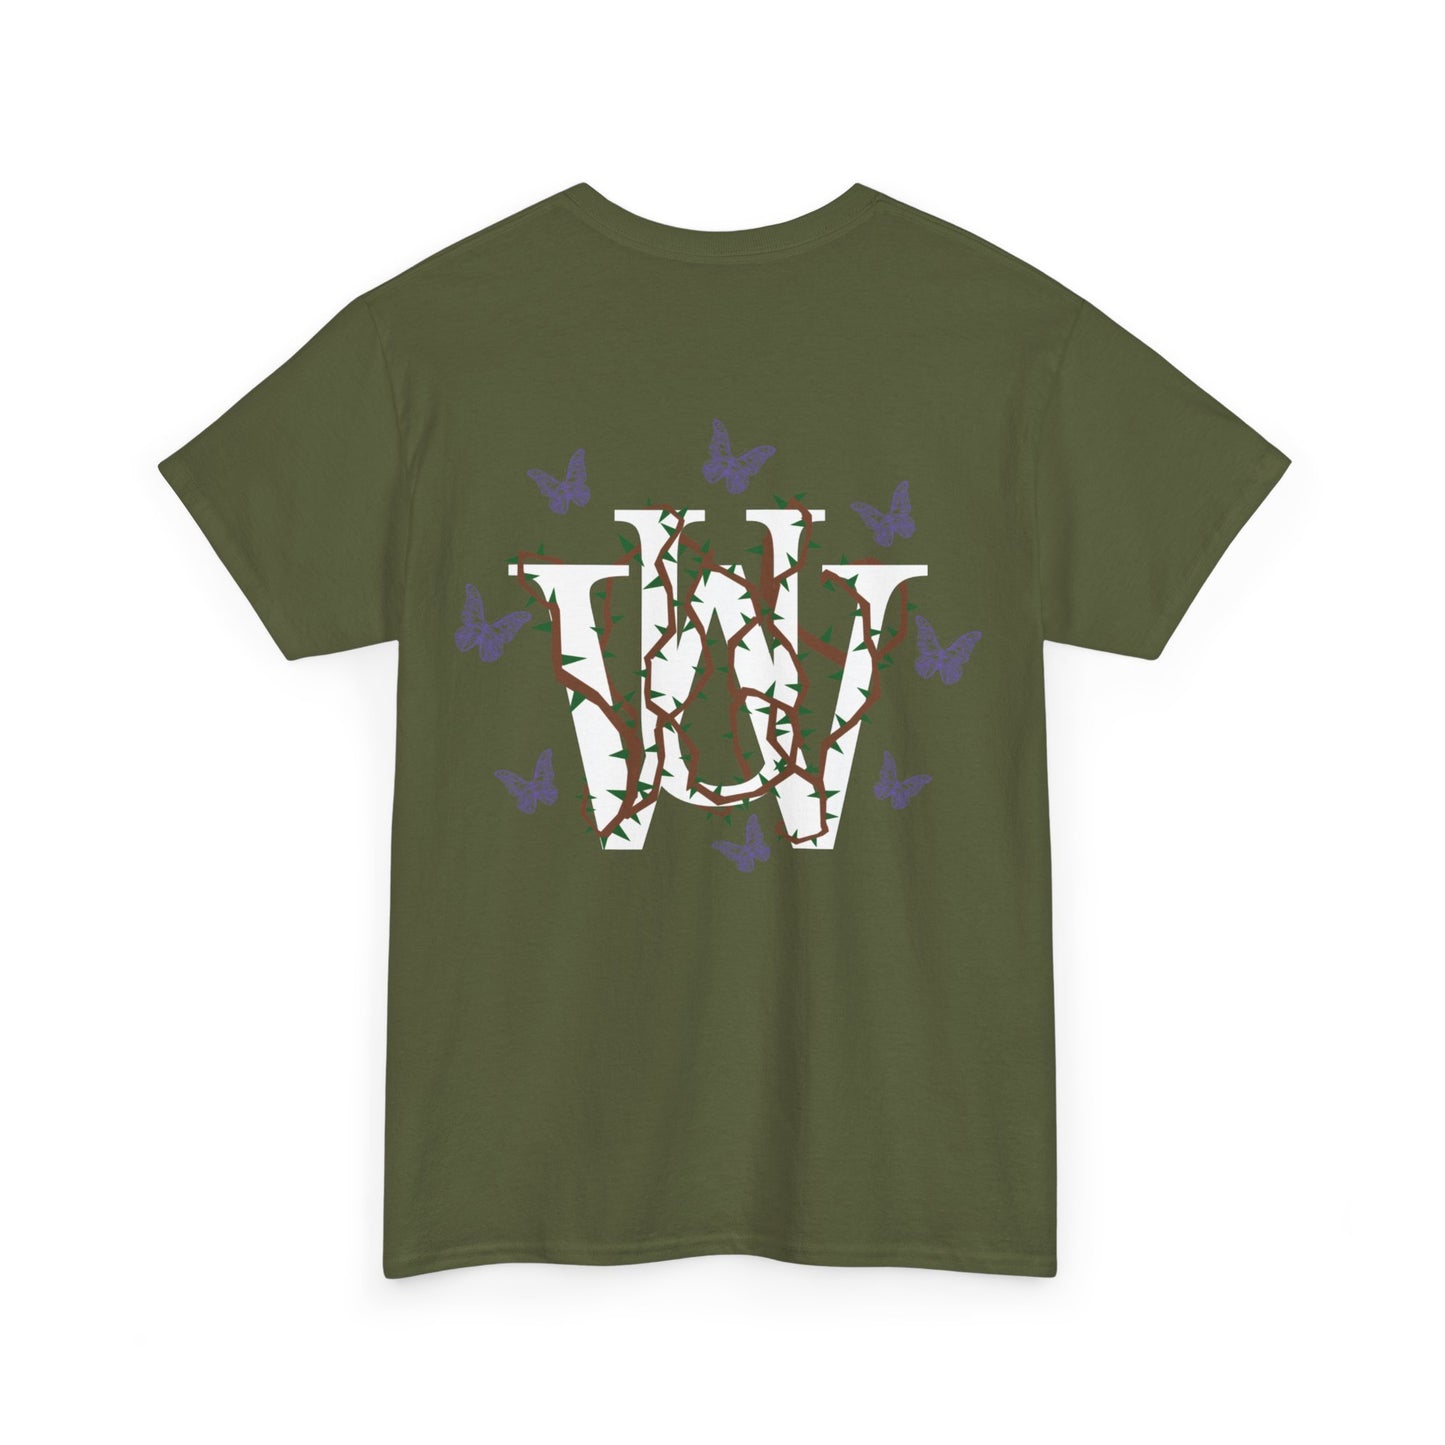 WAKE UP Butterfly Effect Cotton Tee (Remastered)